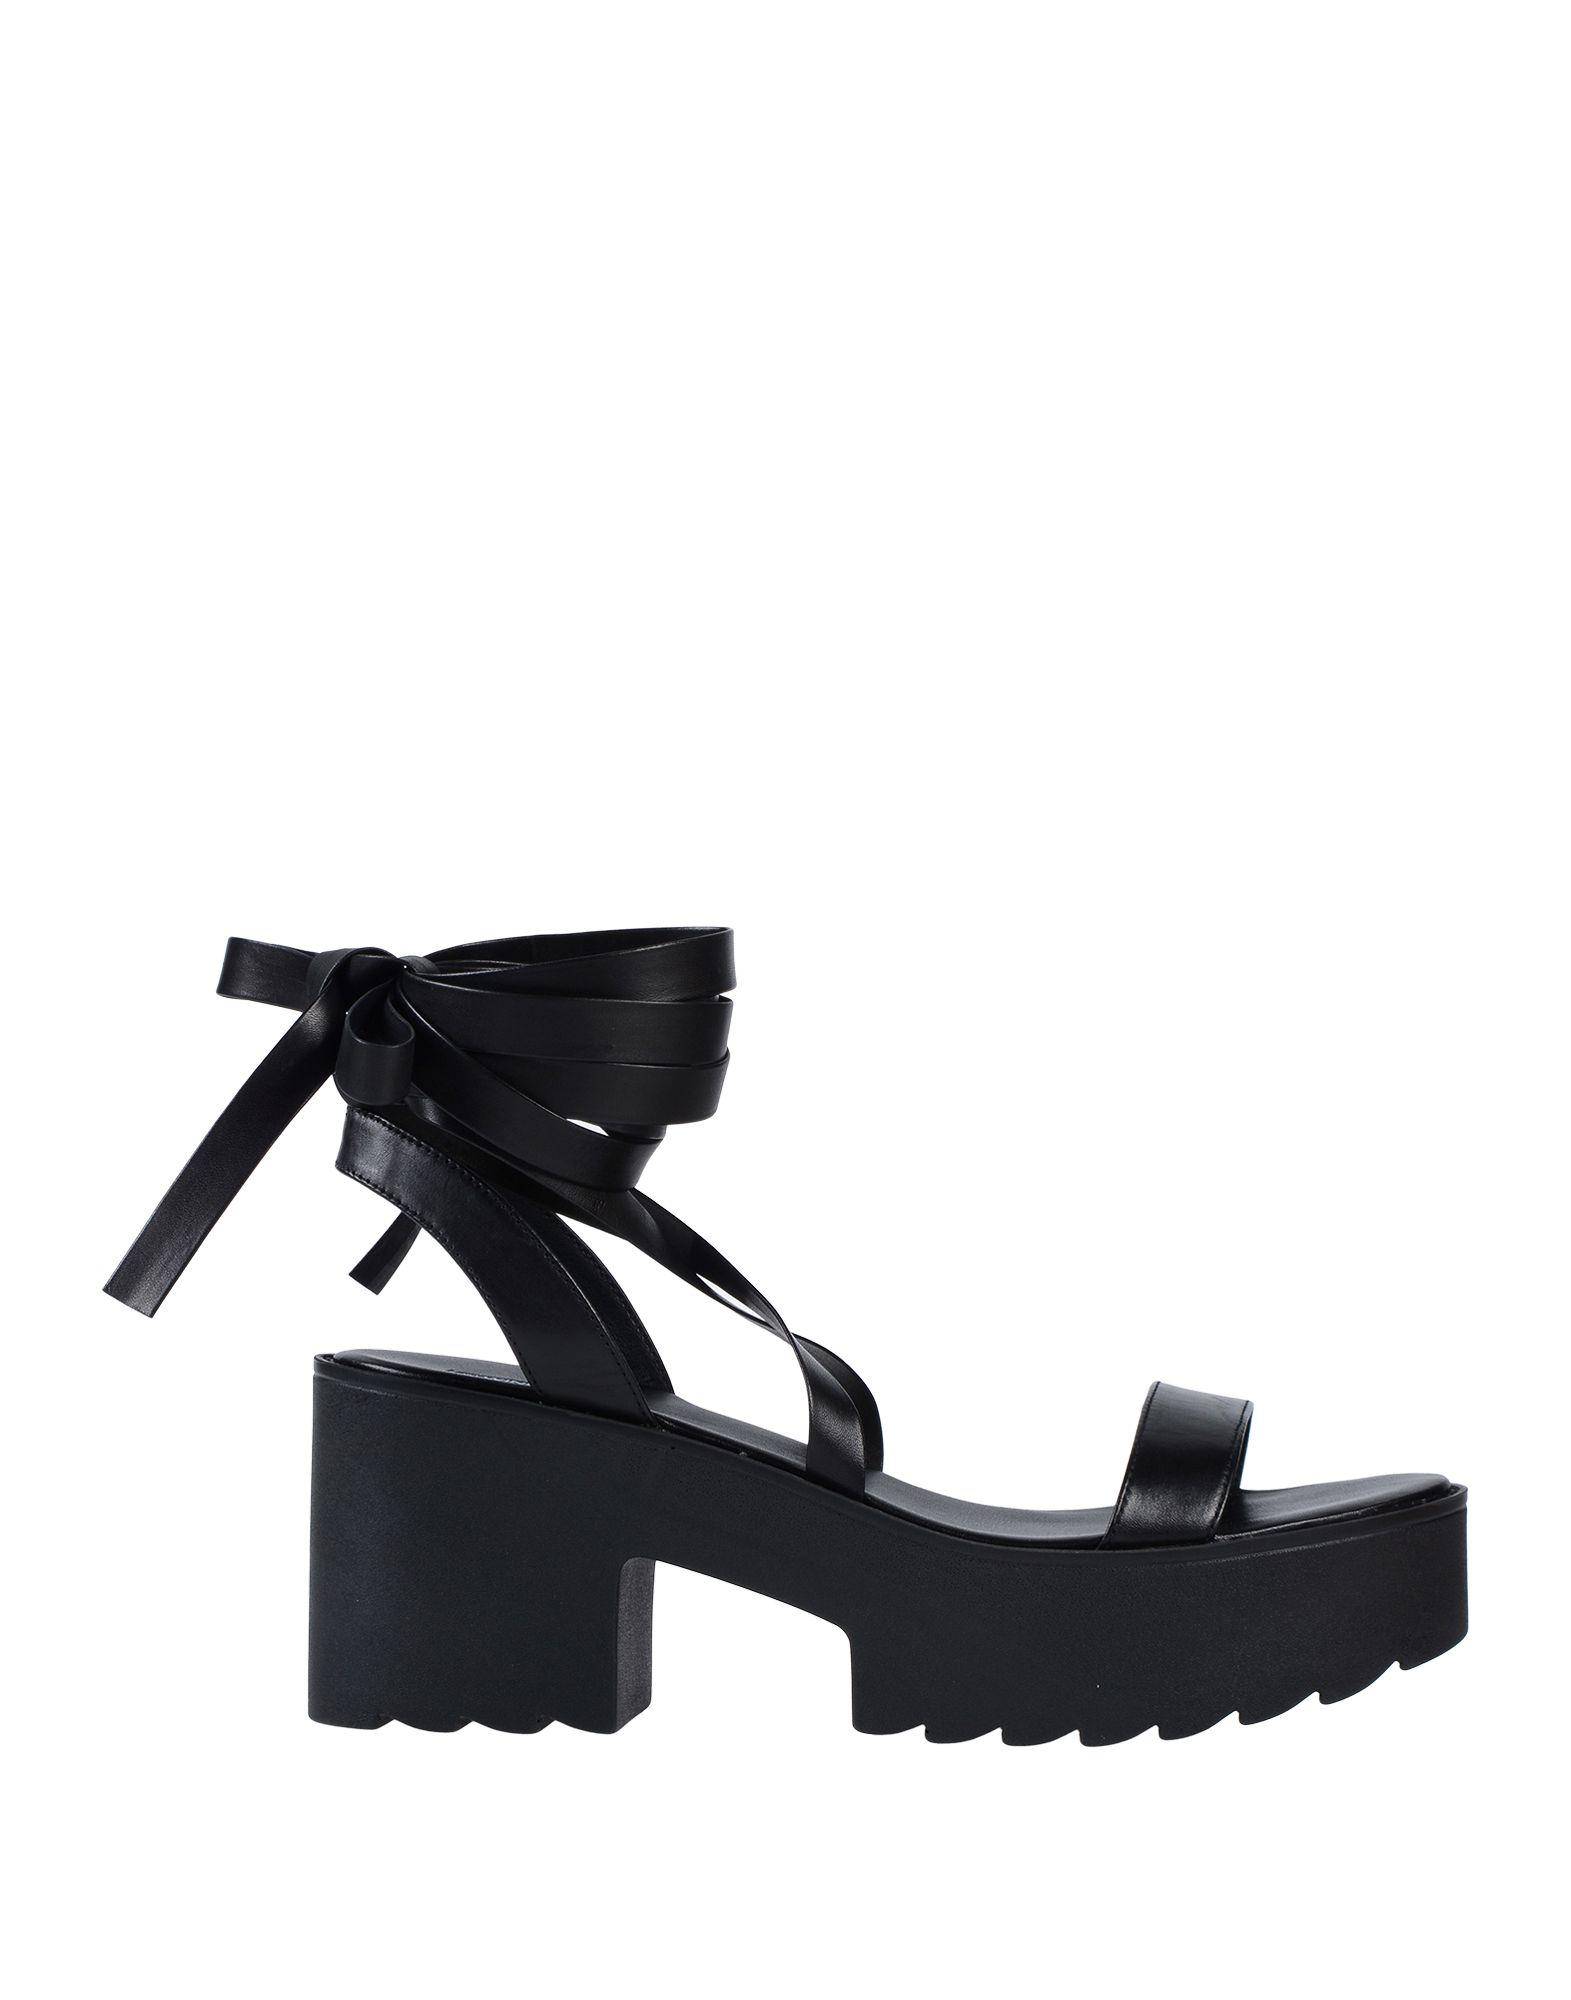 Windsor Smith Leather Sandals in Black - Lyst